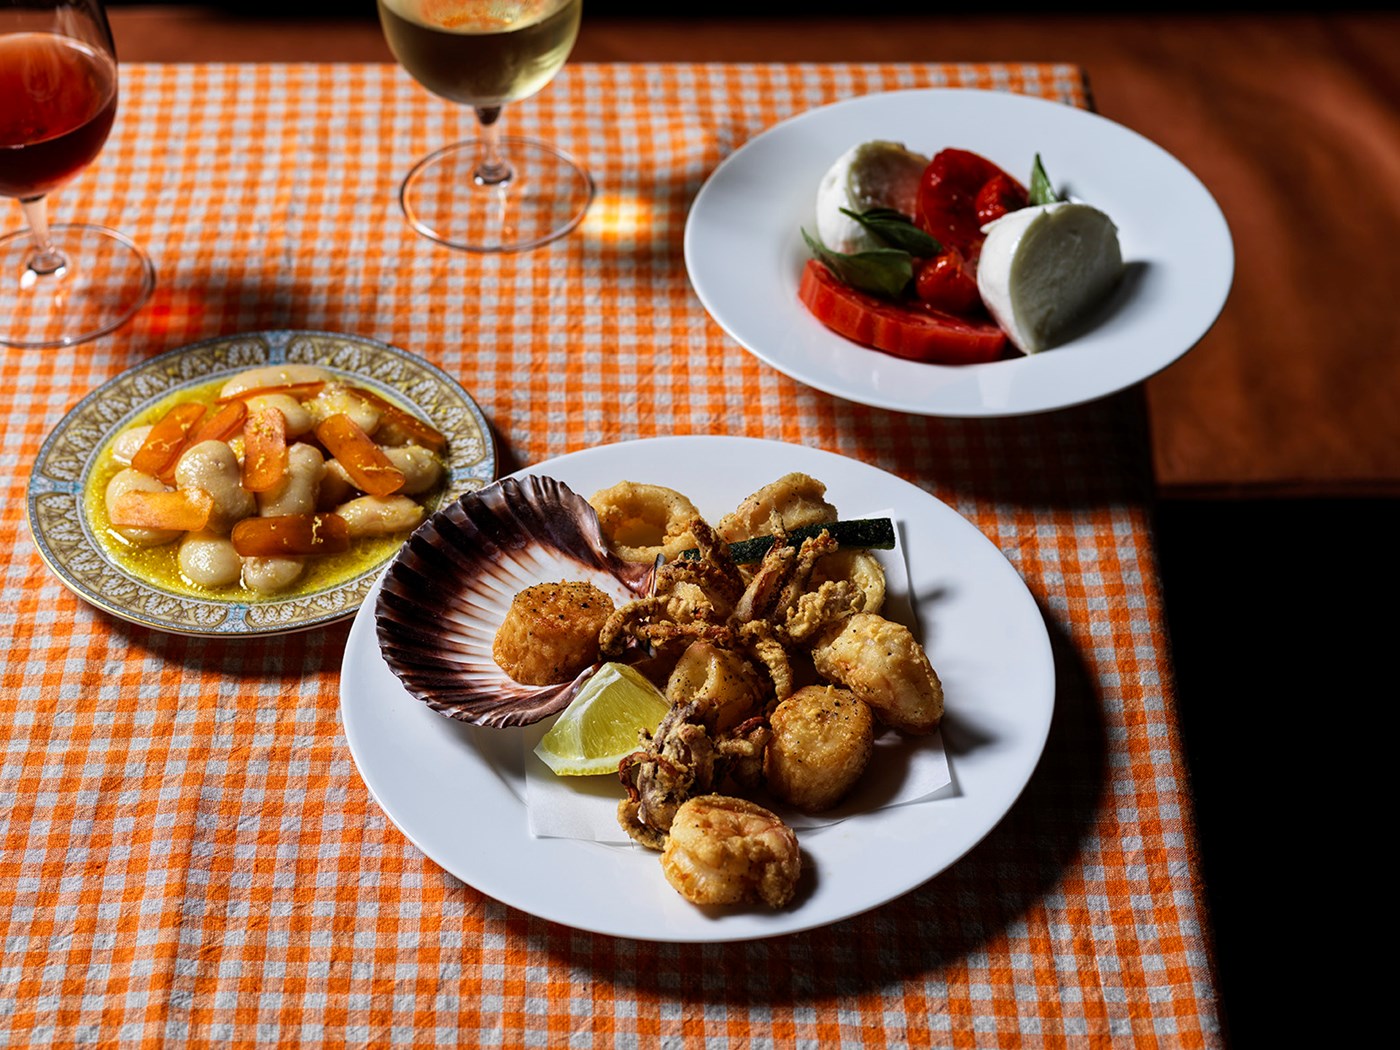 Plates of seafood, beans and fresh tomatoes and mozzarella against an orange and white gingham tablecloth 